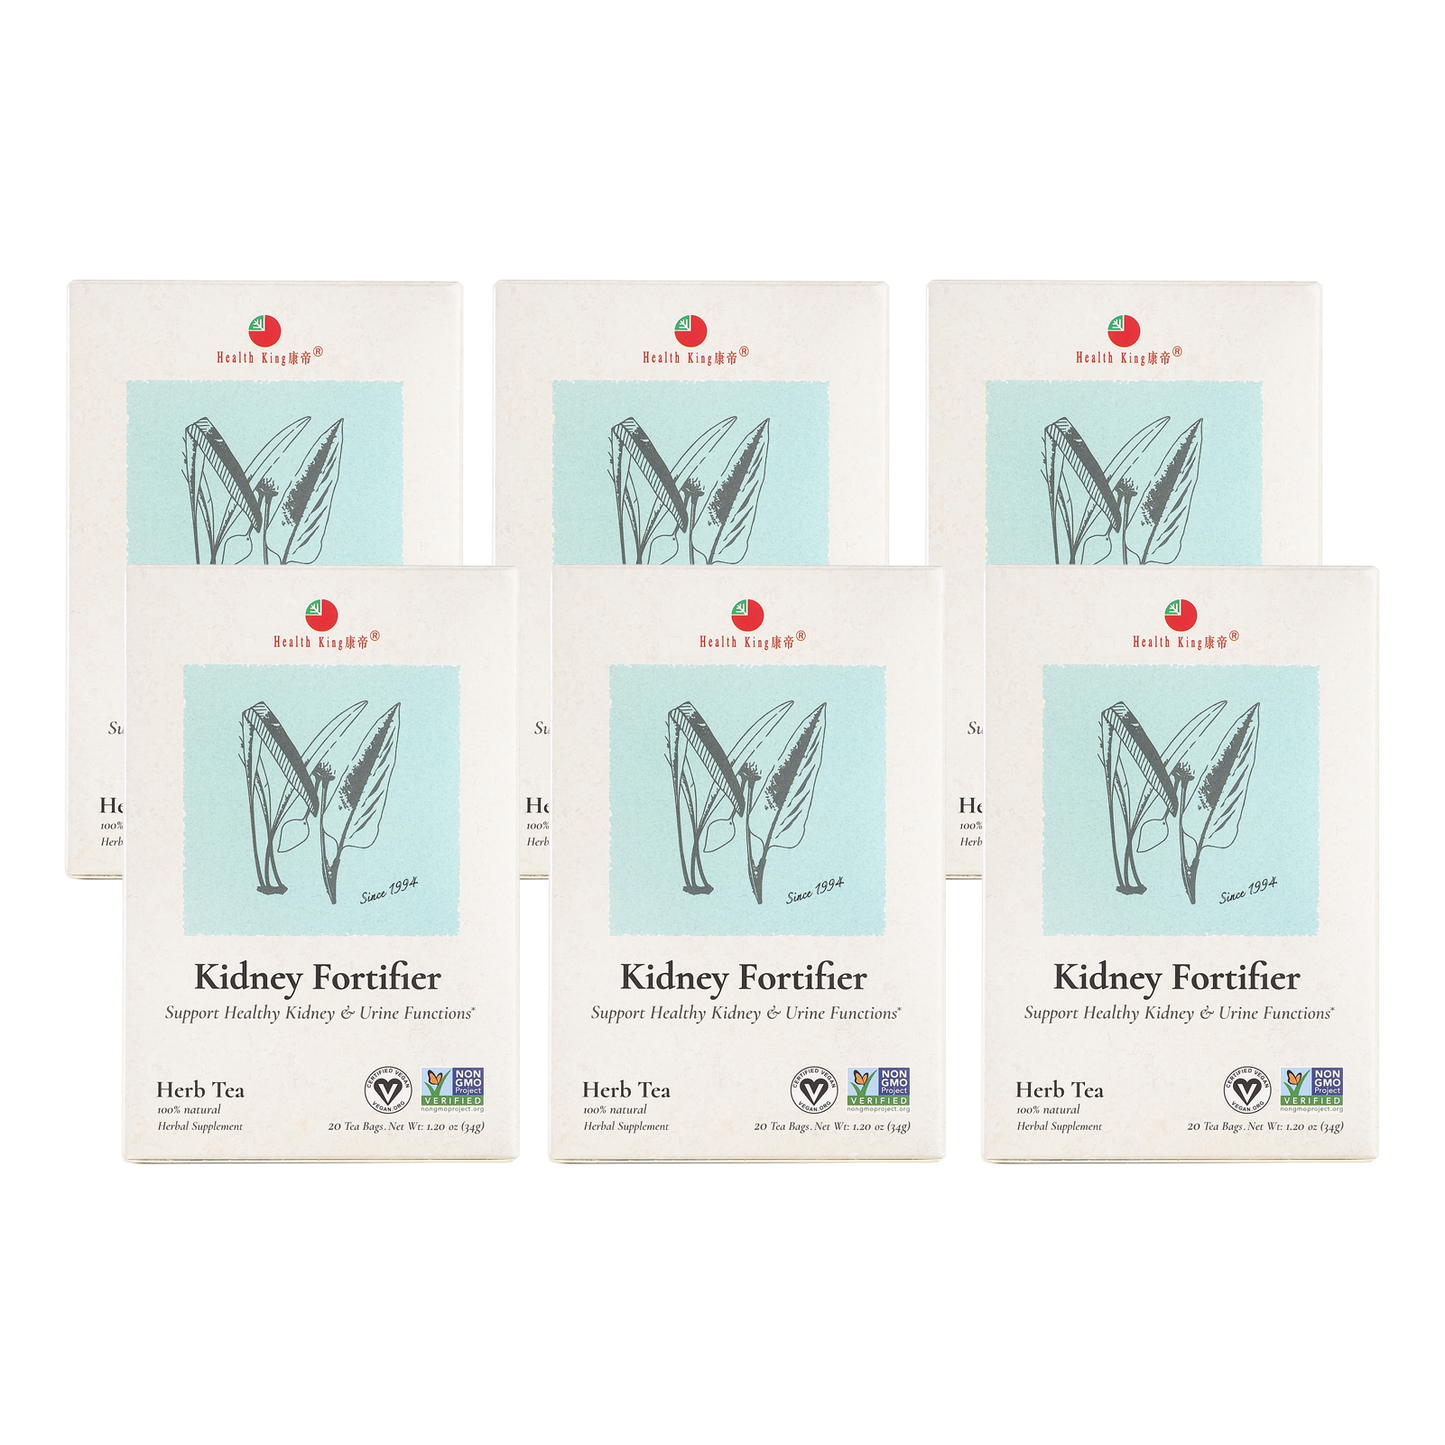 Six boxes of Kidney Fortifier Herb Tea for kidney function support